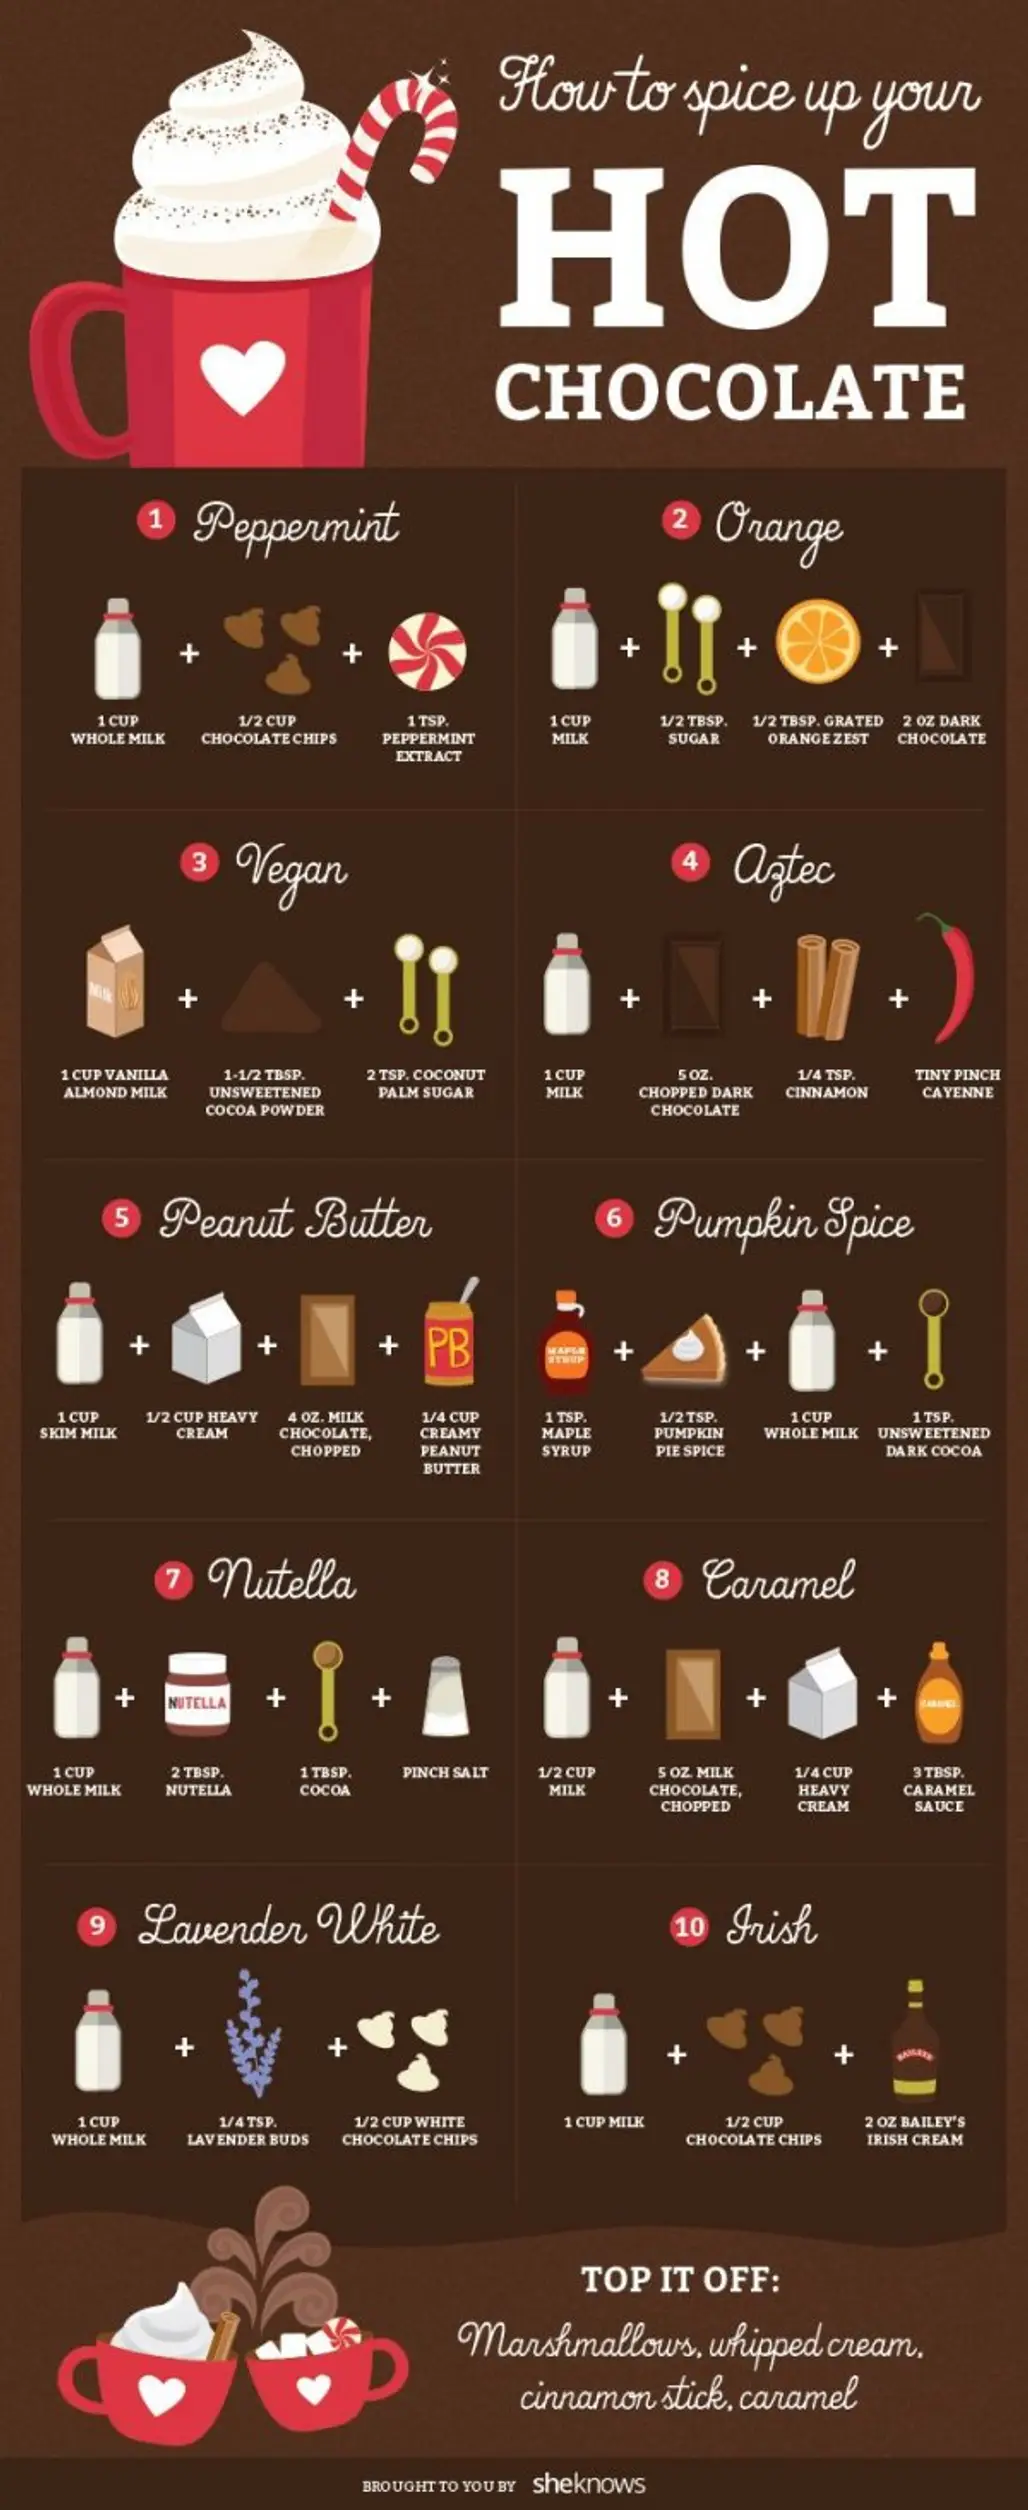 Add What to Your Hot Cocoa?